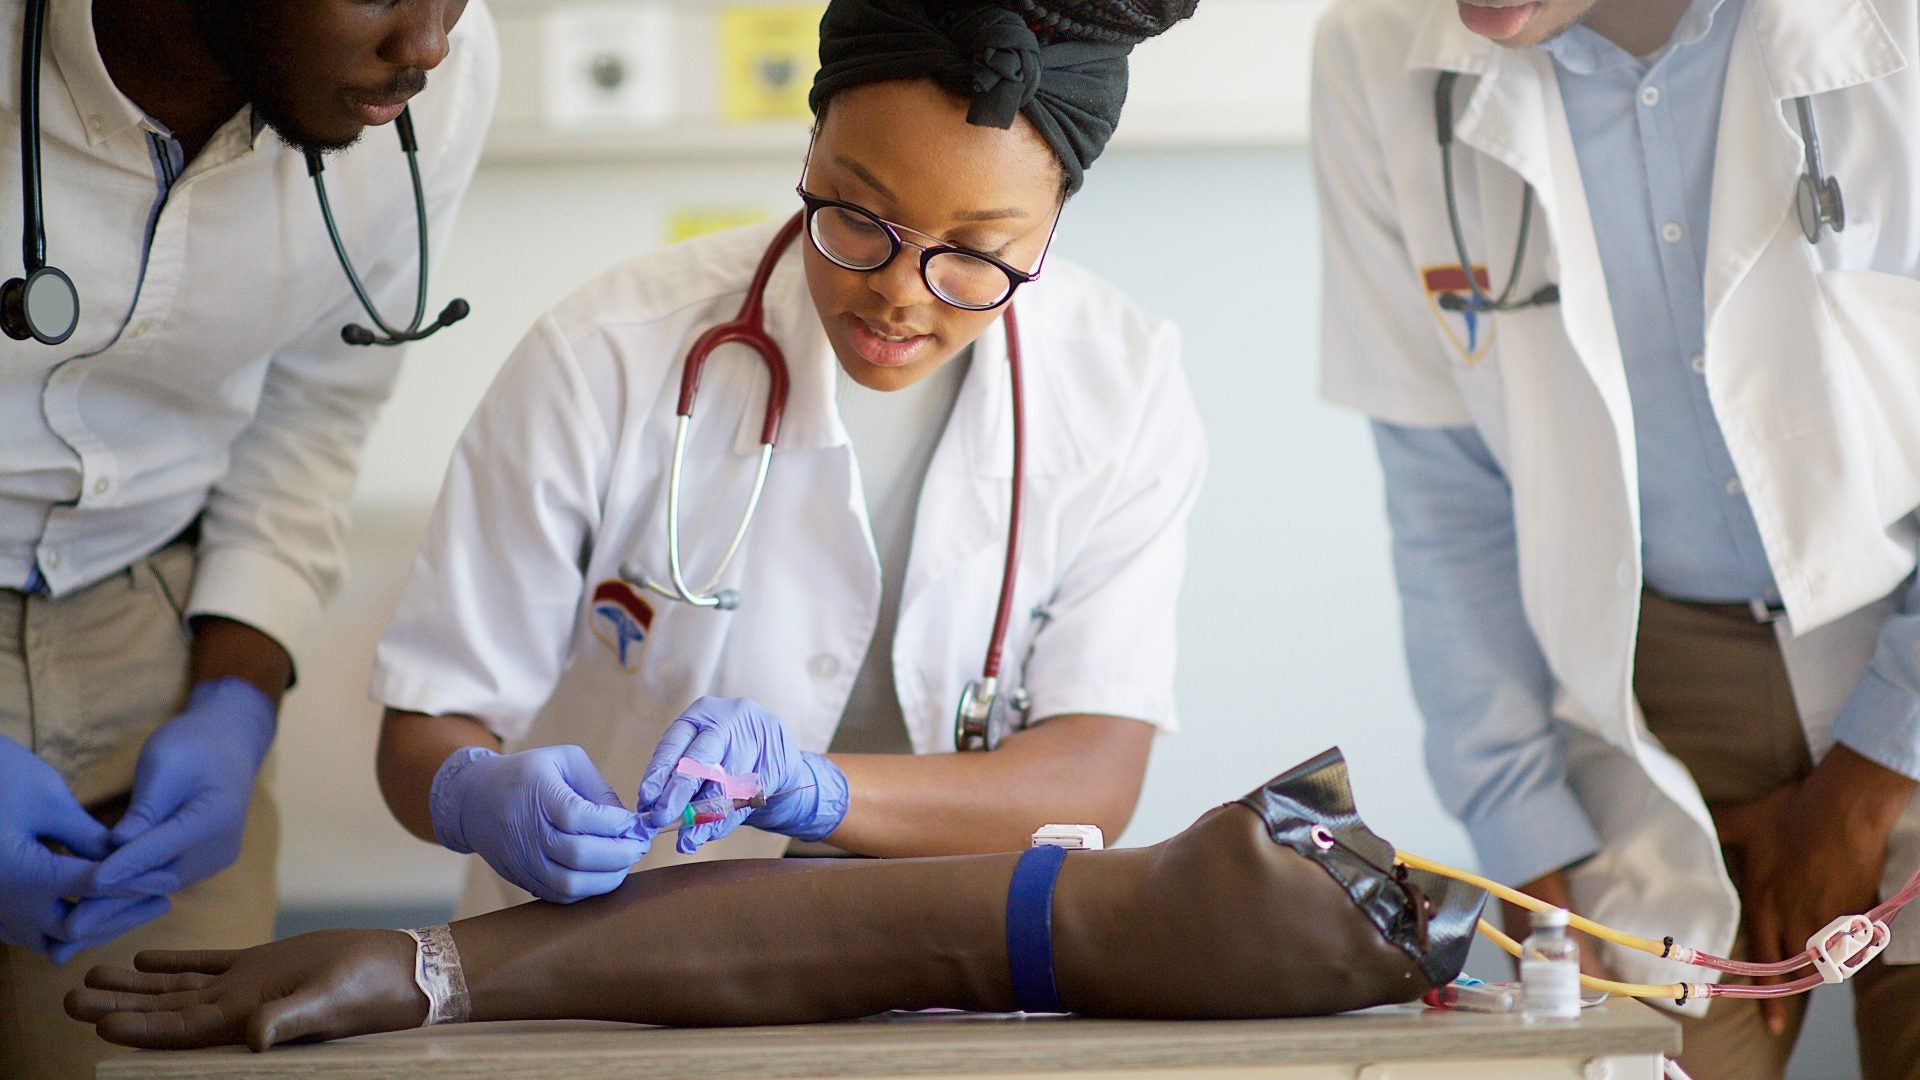 Black Students Are Enrolling At Record Pace To Medical Schools